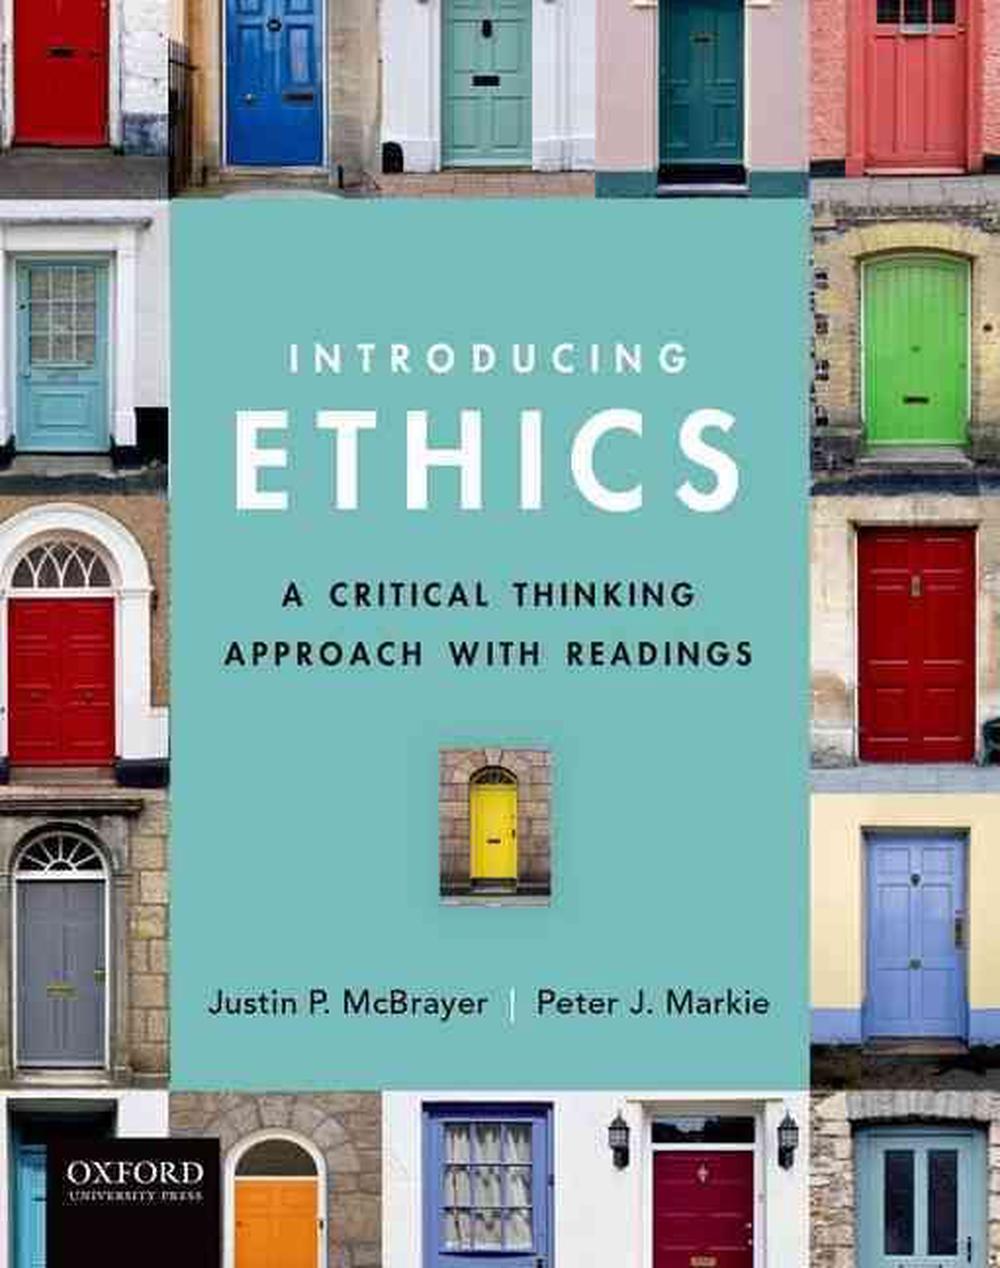 a critical thinking approach to ethics is founded on the principle of